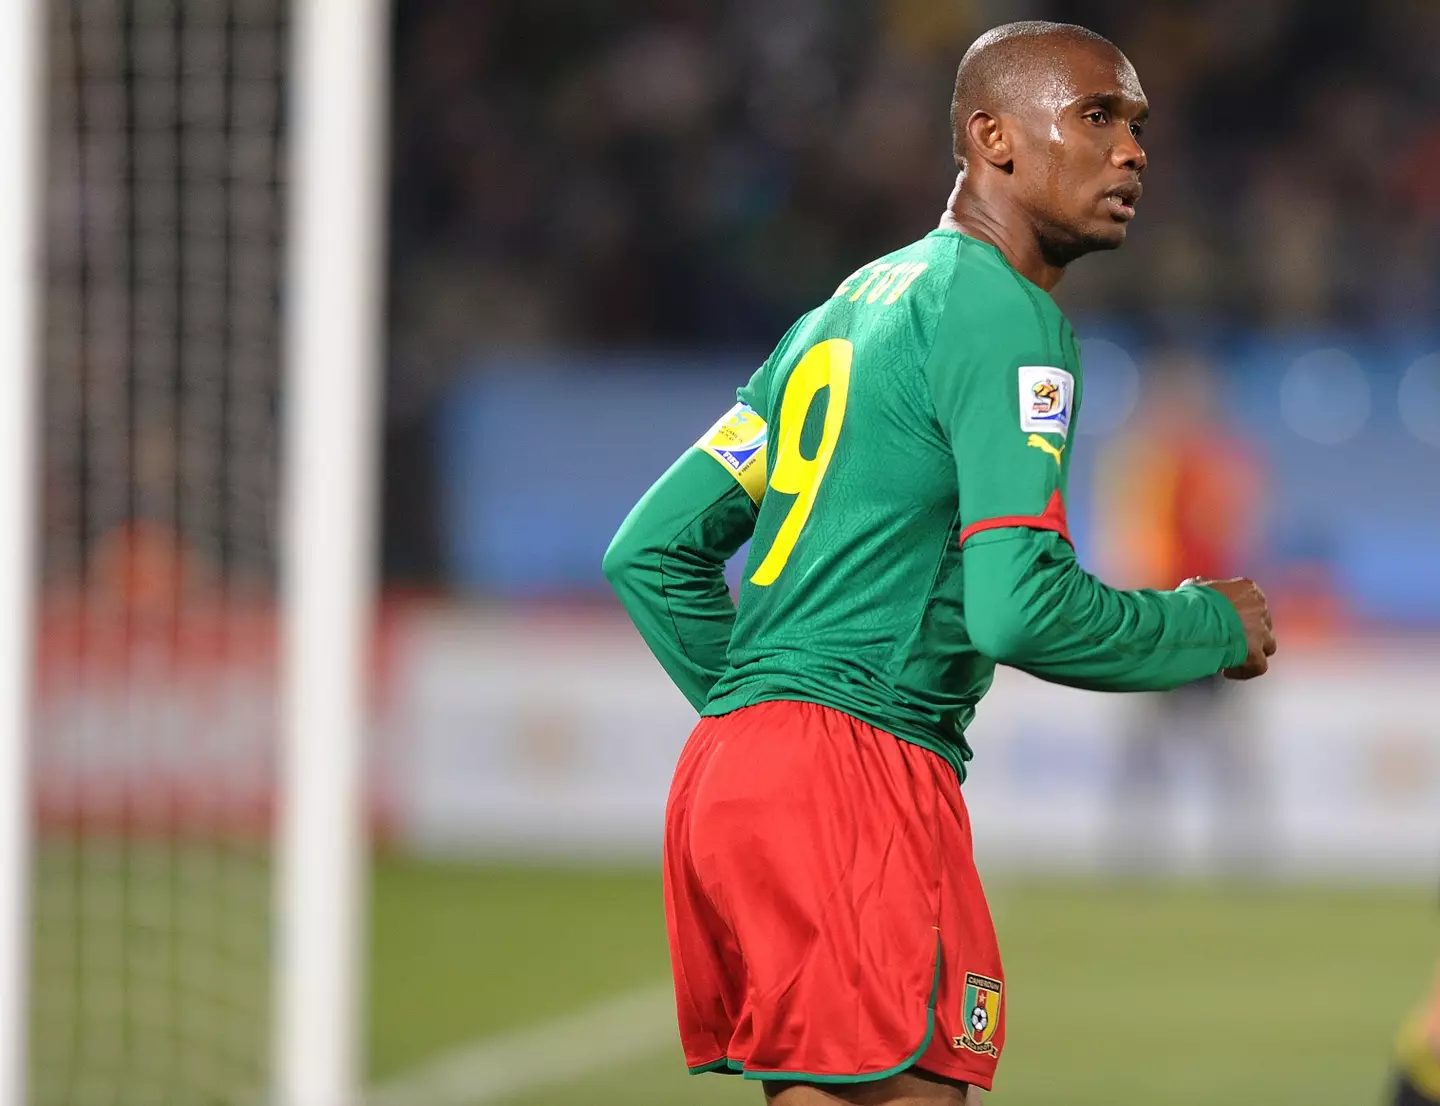 Samuel Eto'o in action for Cameroon. Image